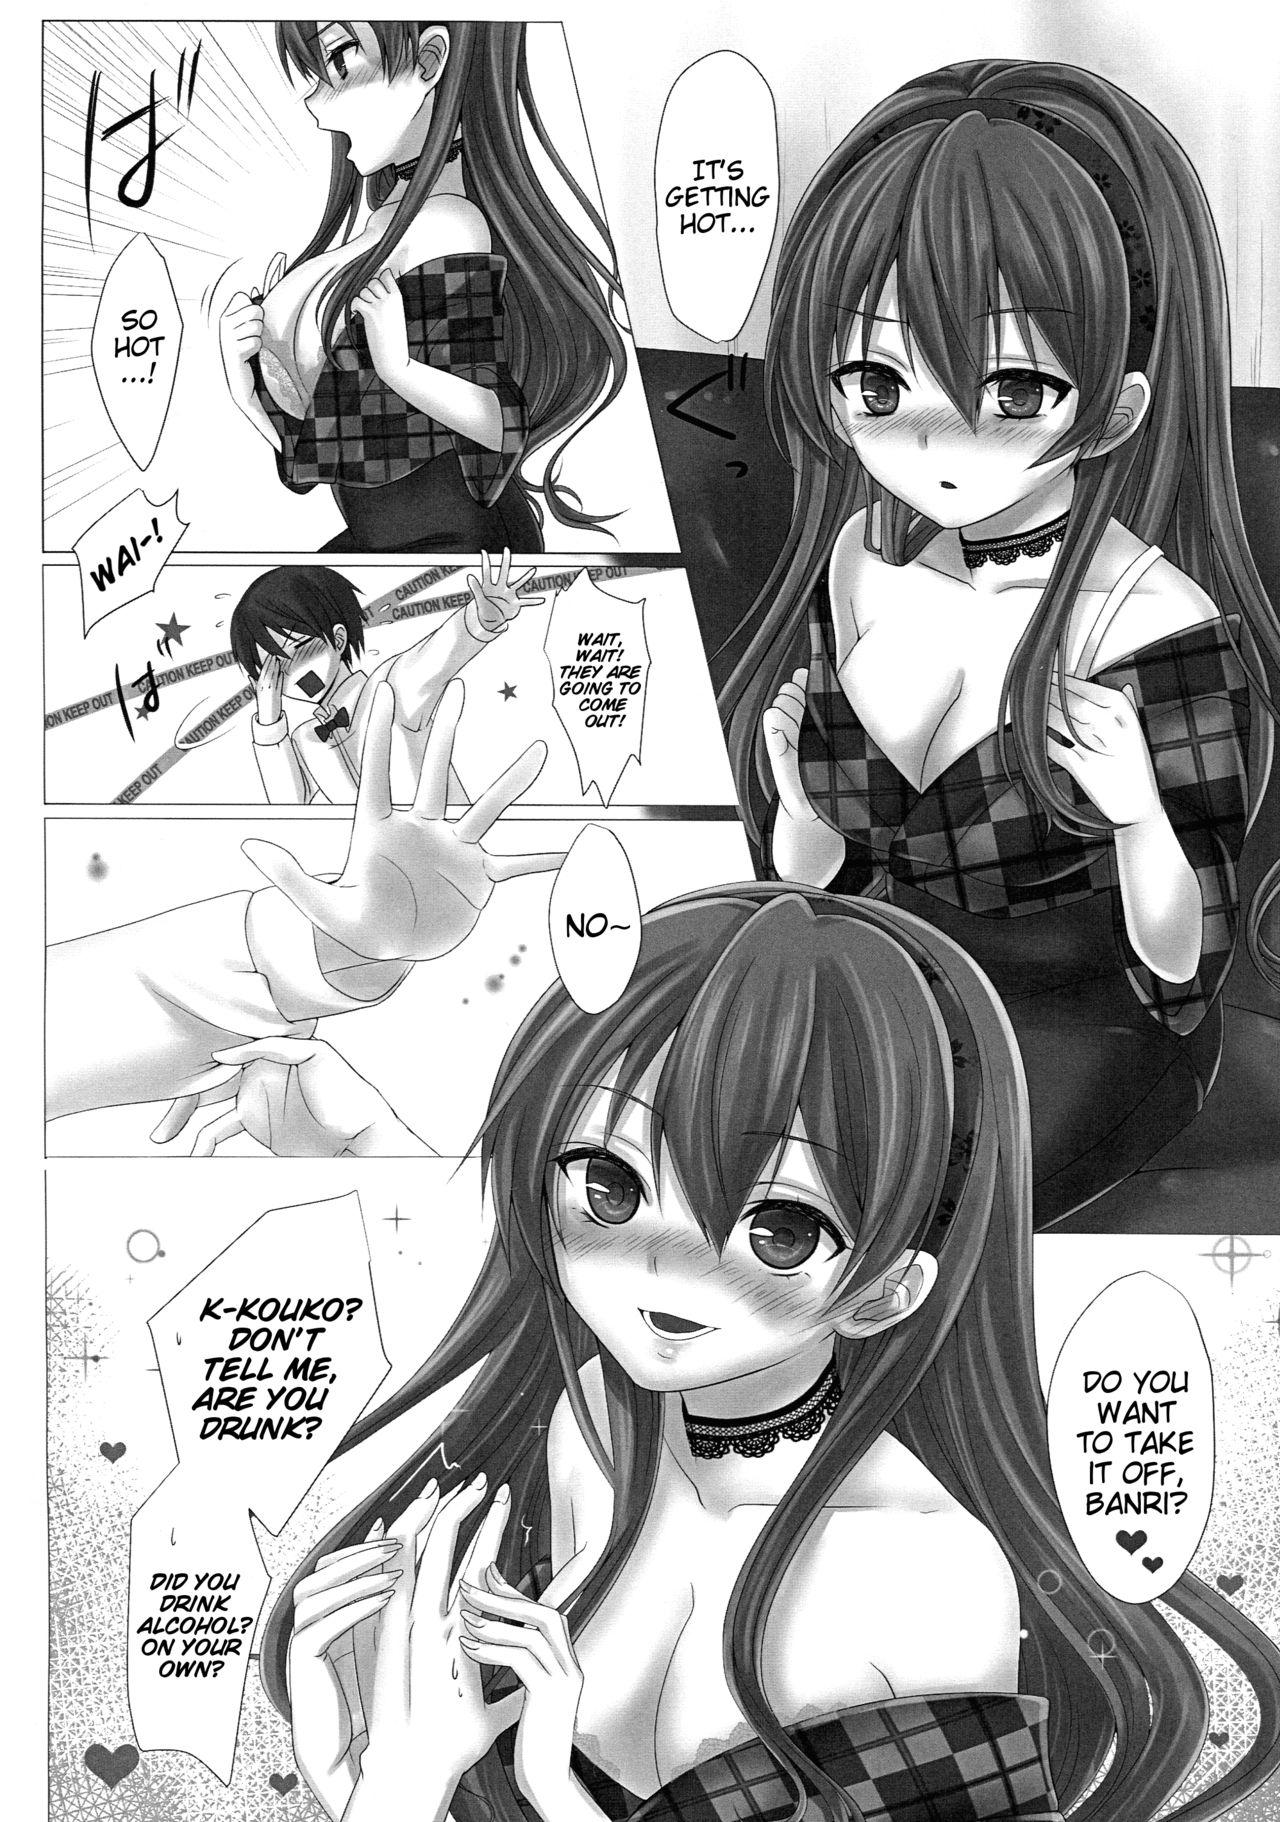 Whipping KISS ME TOUCH ME - Golden time Orgasm - Page 5